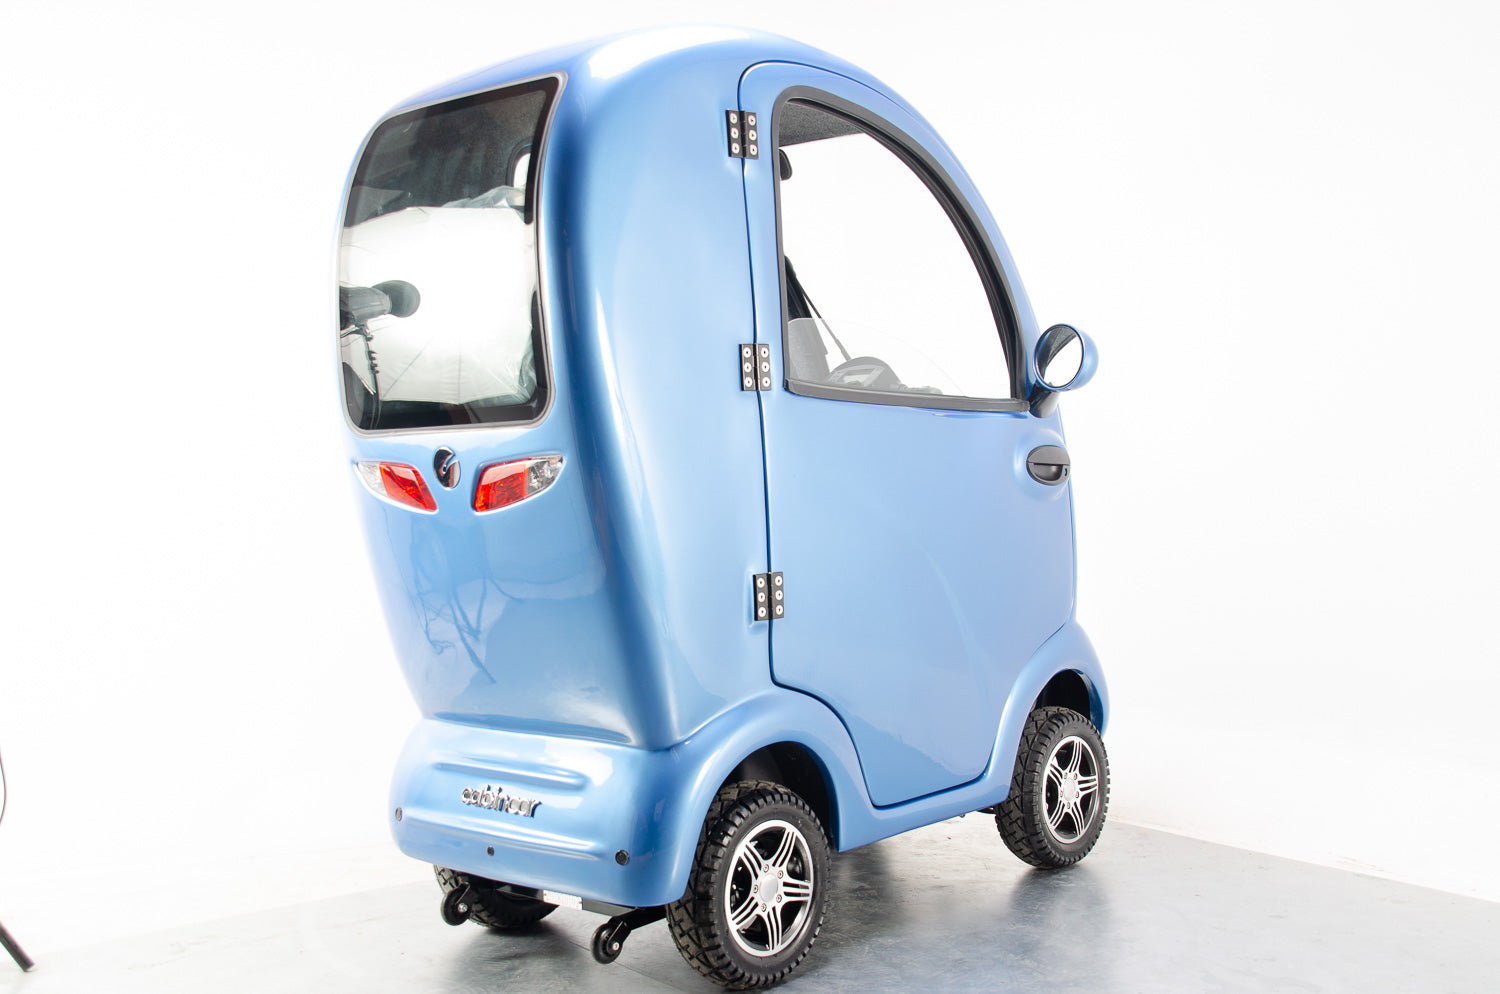 New Cabin Car Mk2 from Scooterpac Large 4 Wheel Covered Scooter Car 8mph Class 3 Road Legal in Blue